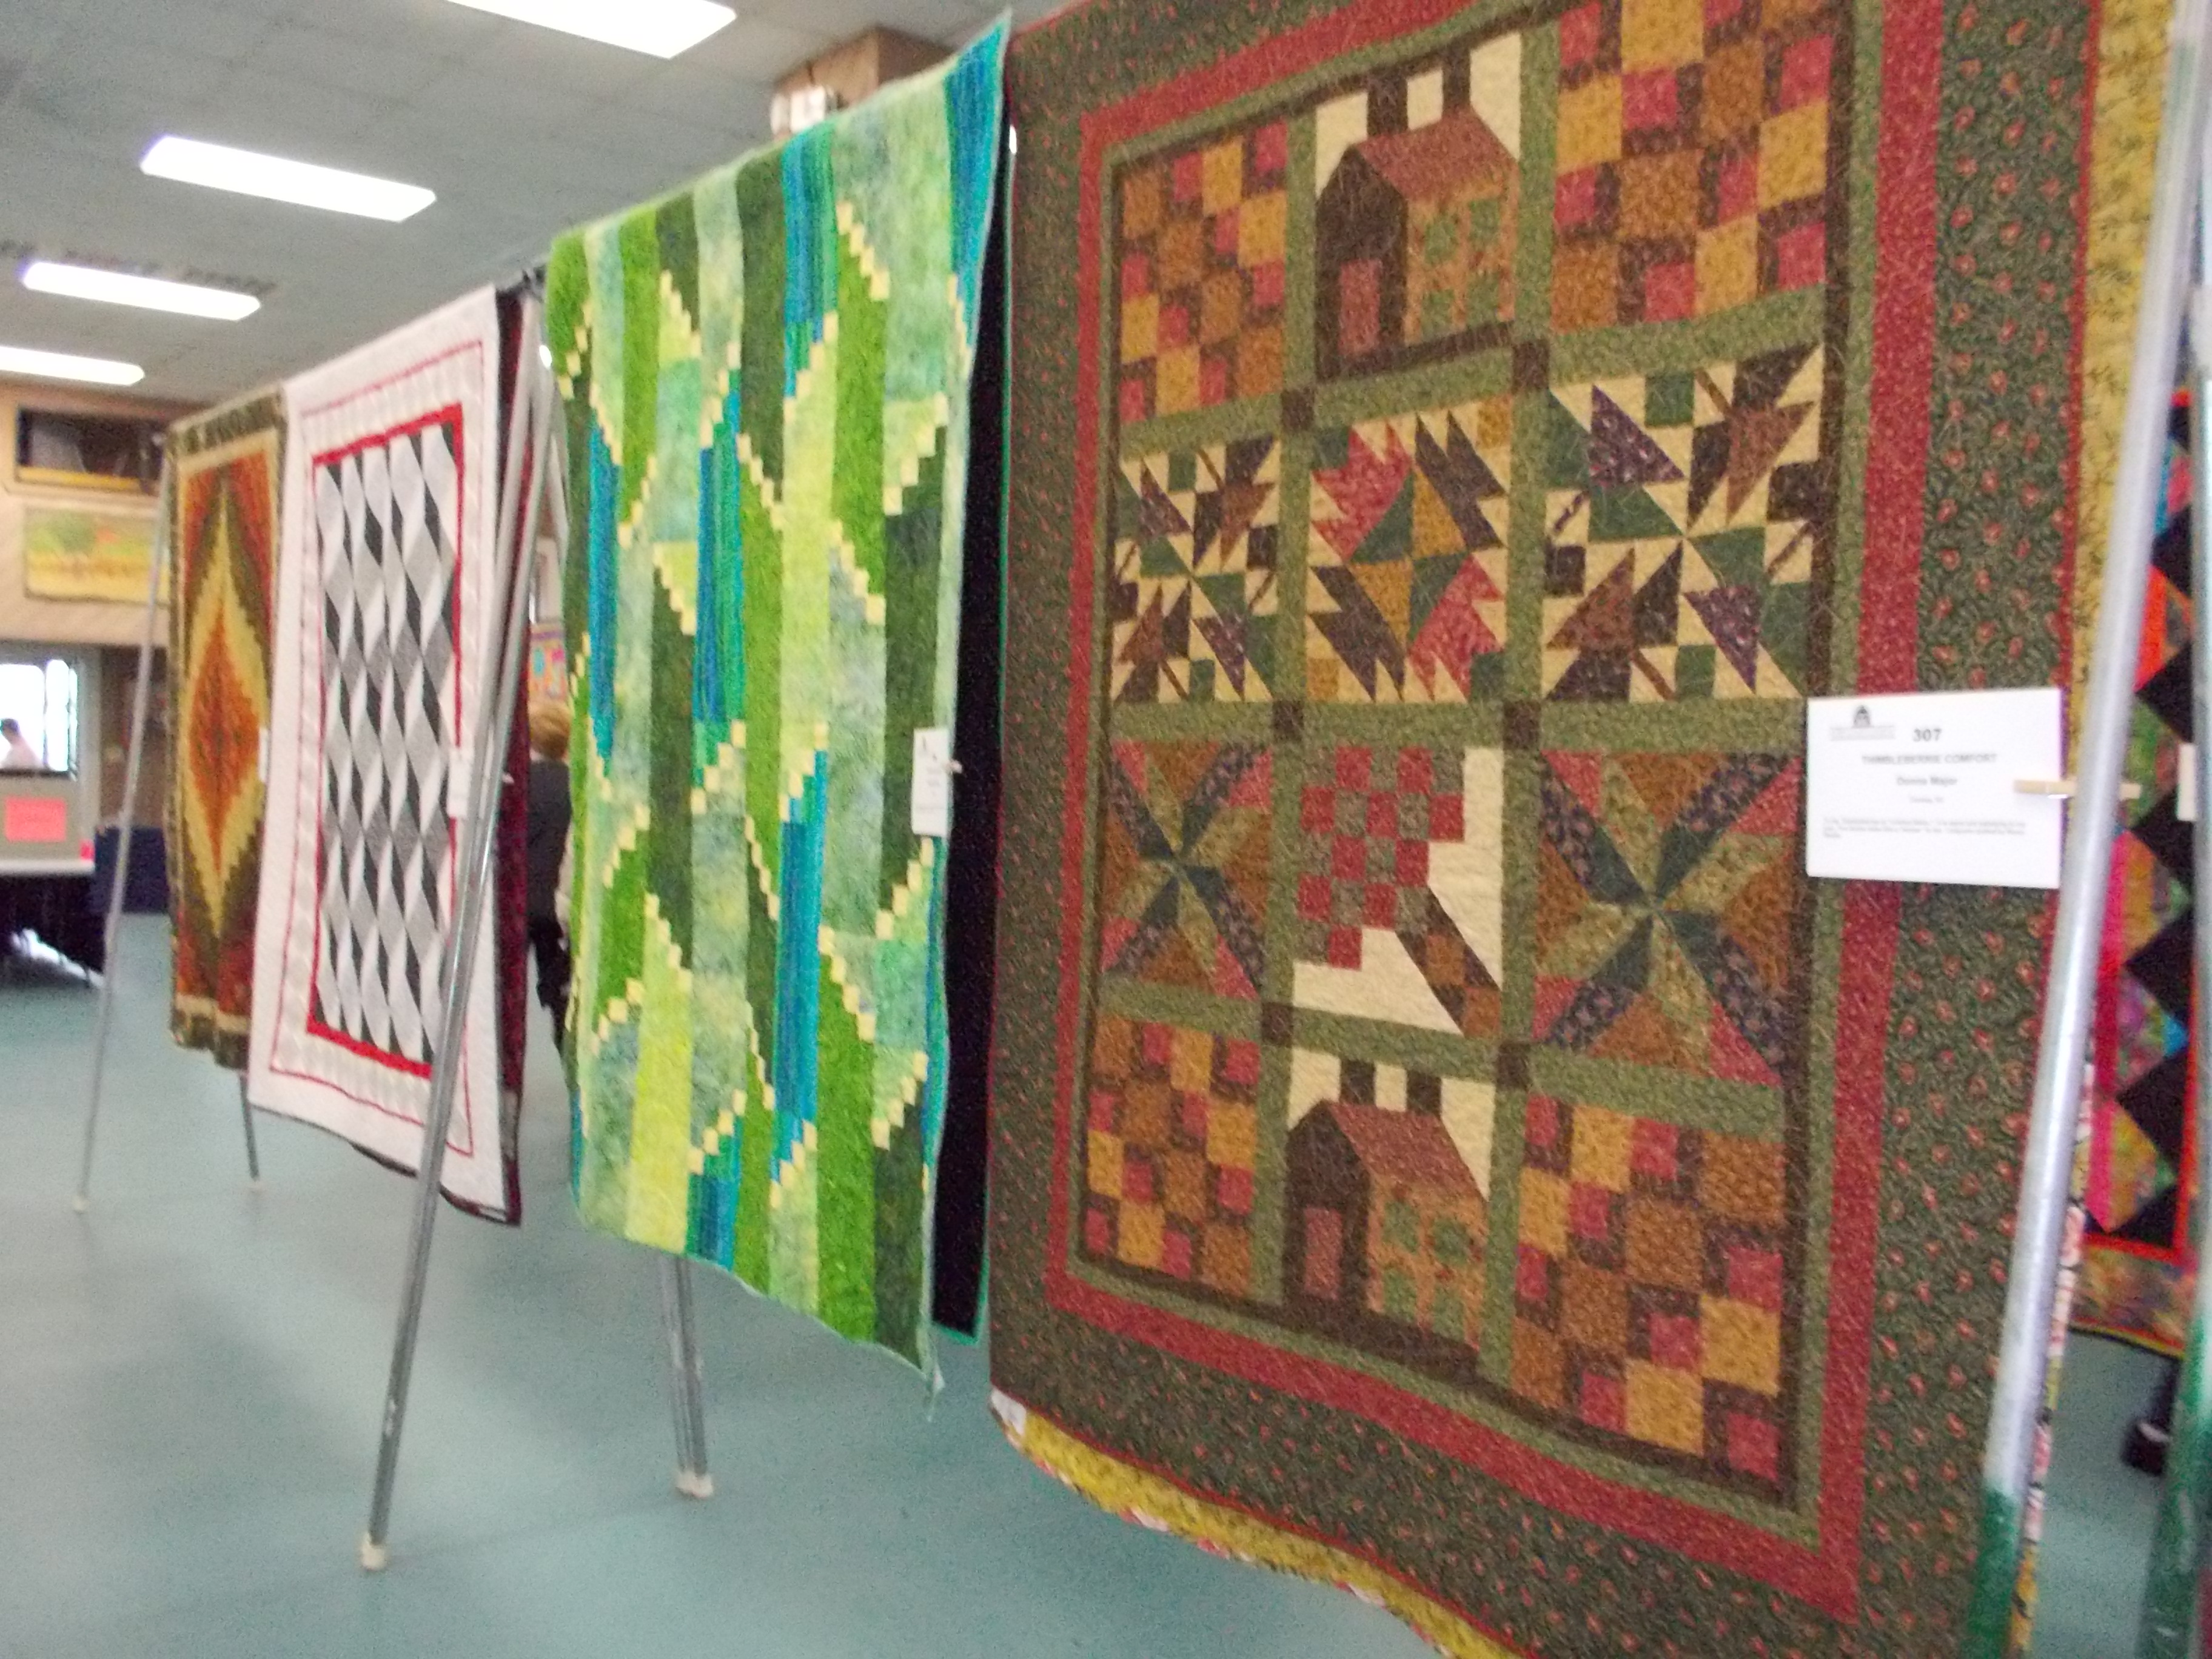 At the quilt show in Ocean Lakes, Surfside Beach, SC